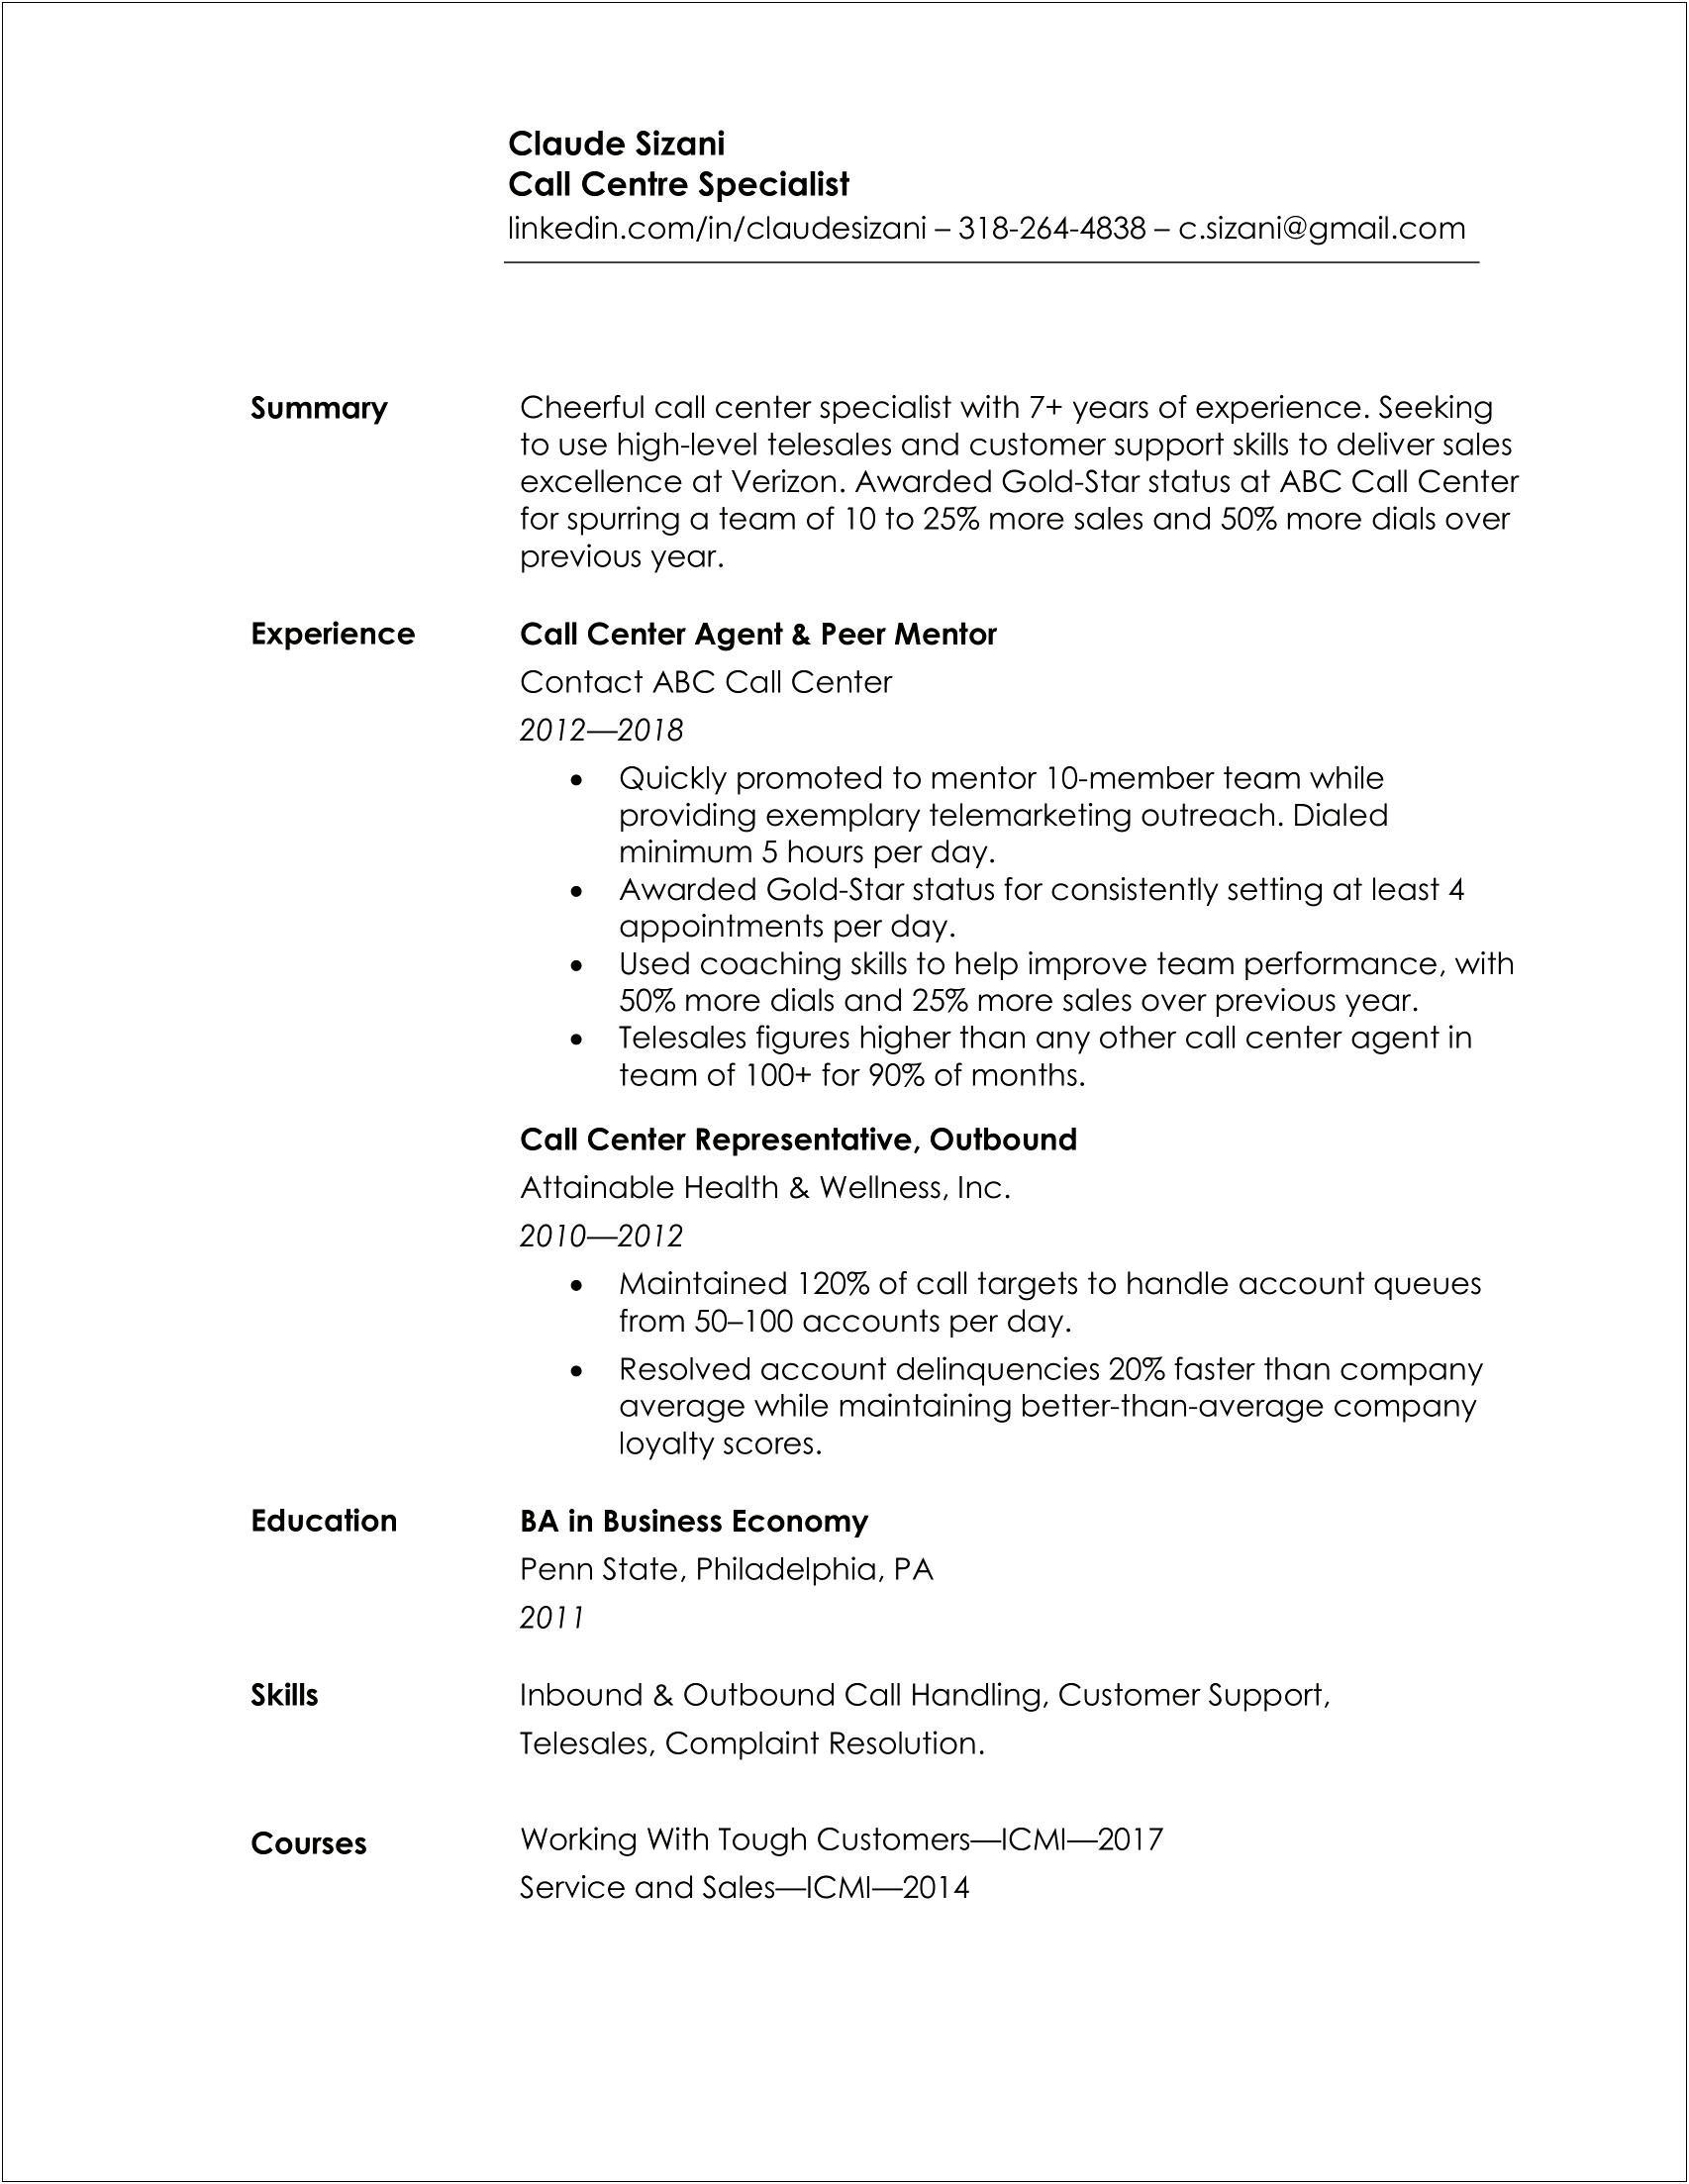 Resume Design For Lots Of Experience